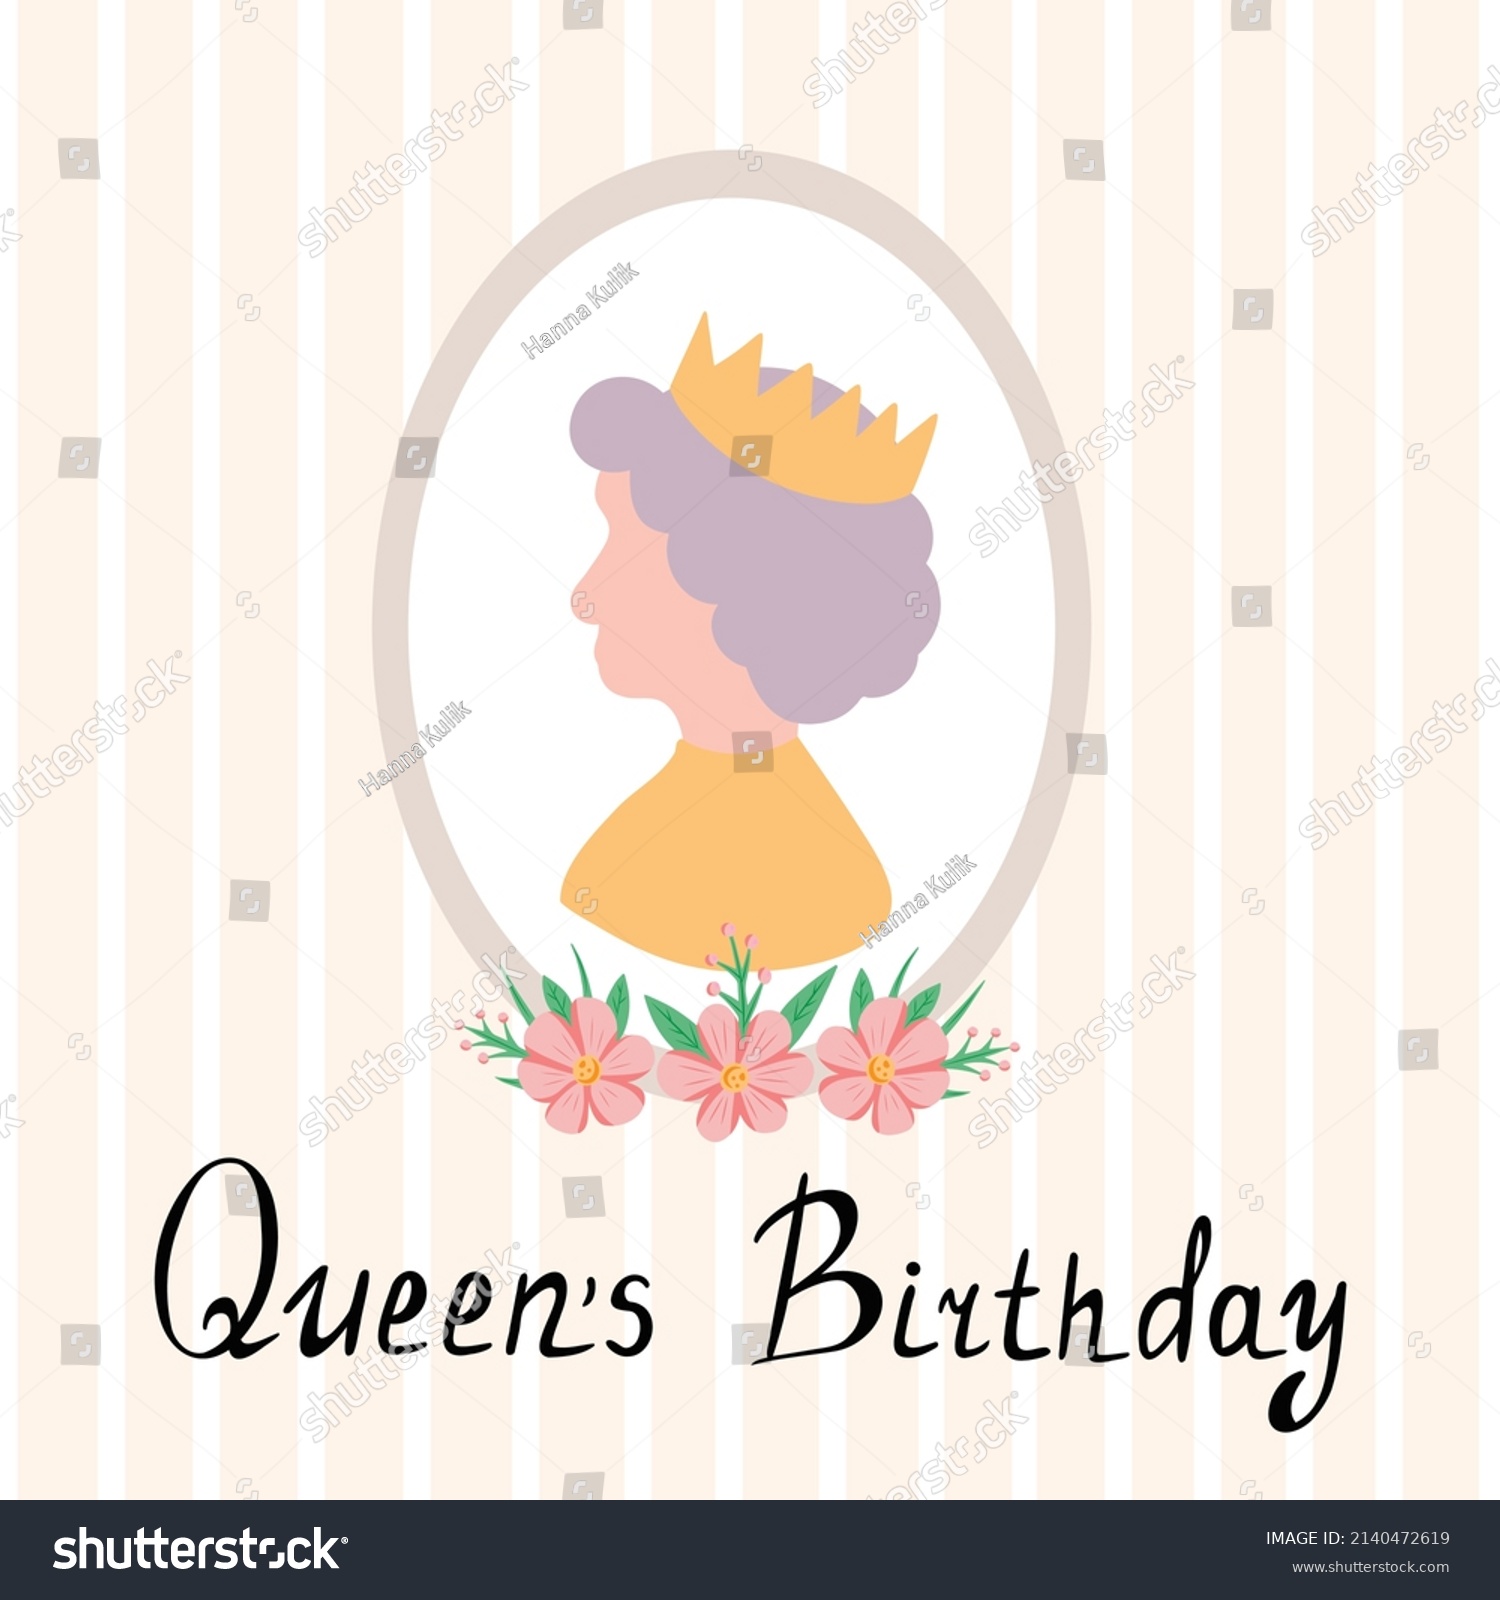 SVG of Queen's birthday, woman silhouette. Queen's platinum jubilee. crown as a symbol of the kingdom. Vector Illustration for printing, backgrounds, greeting cards, posters, stickers and textile. svg